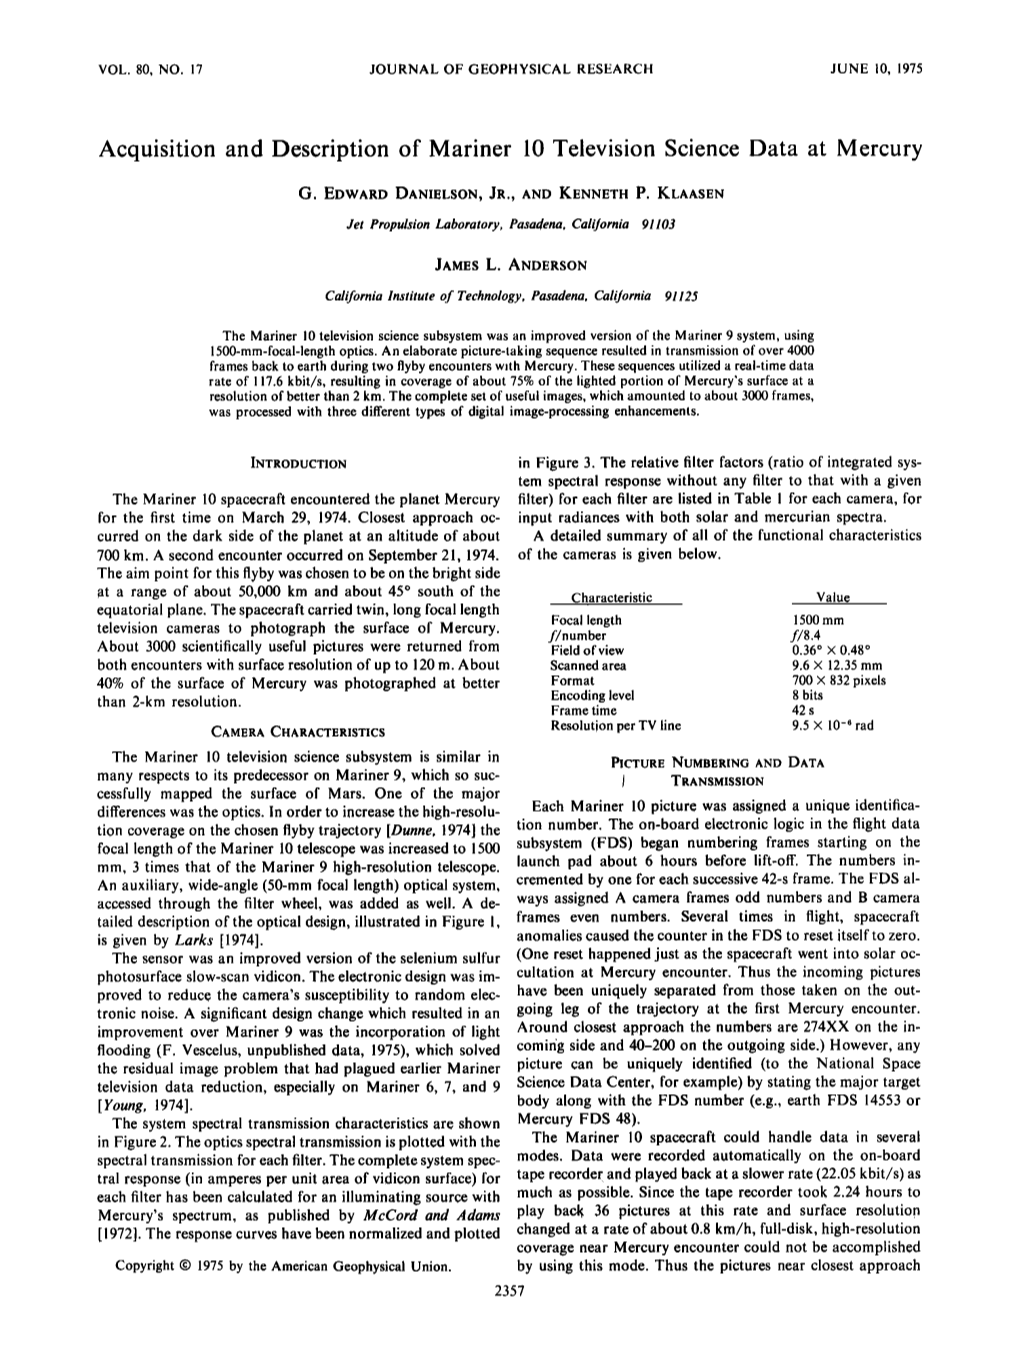 Acquisition and Description of Mariner 10 Television Science Data at Mercury